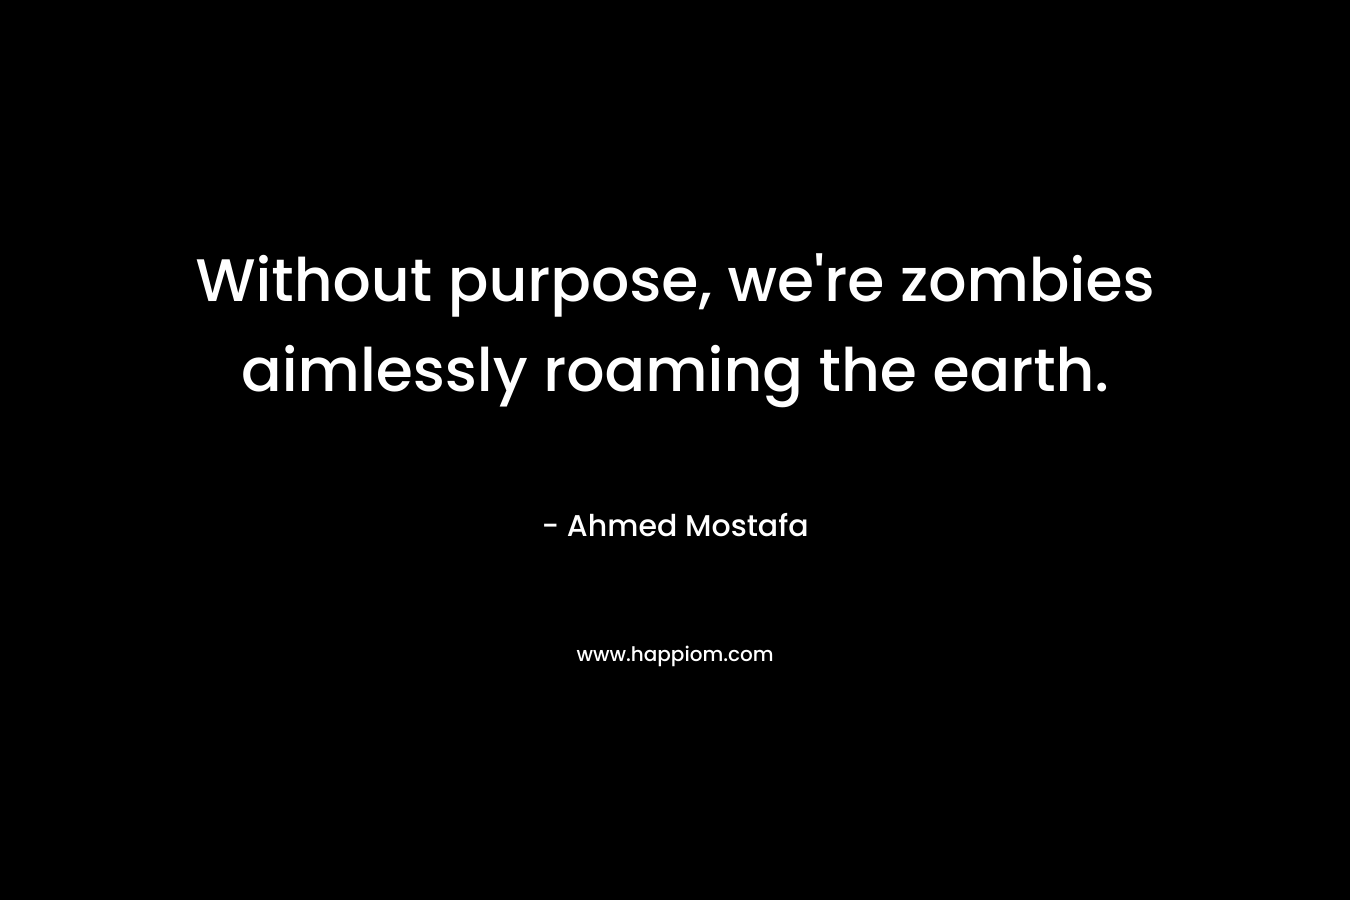 Without purpose, we're zombies aimlessly roaming the earth.